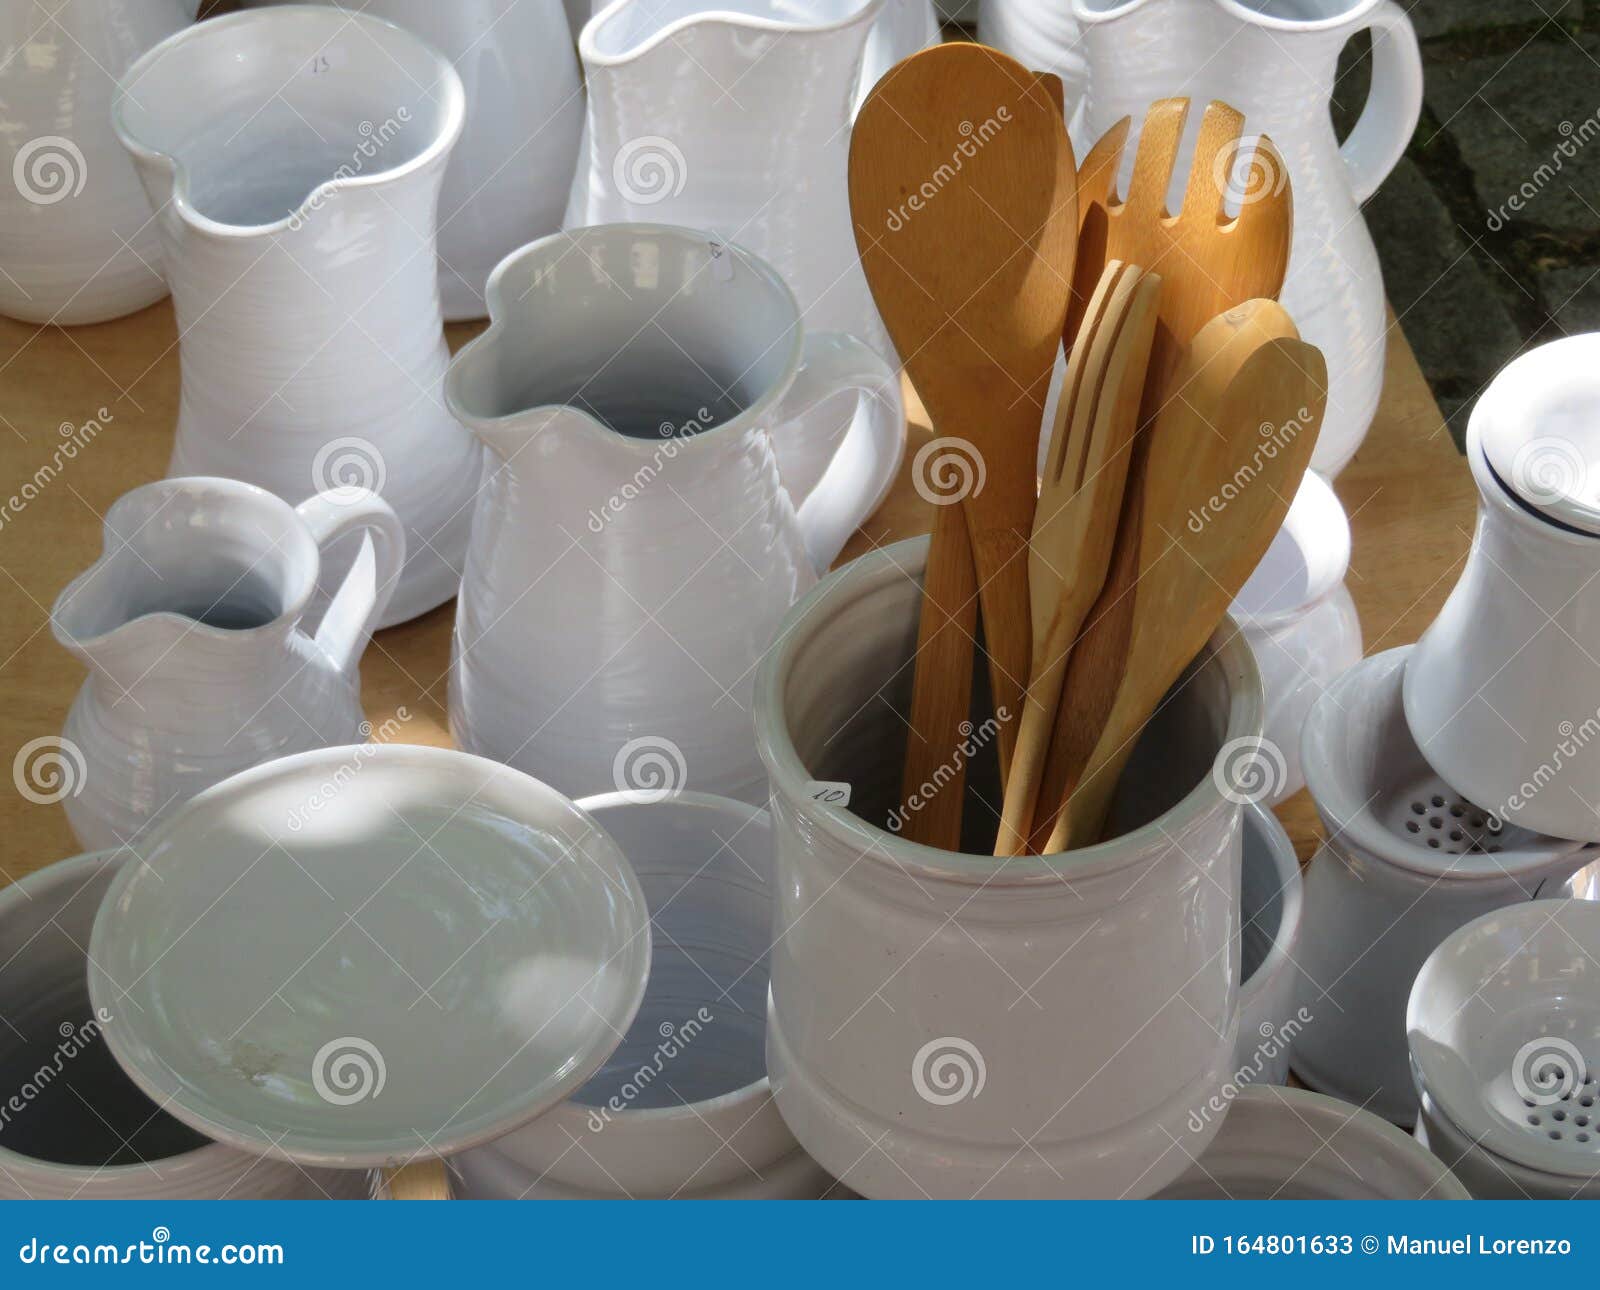 beautiful kitchen utensils made of clay by hand by expert hands